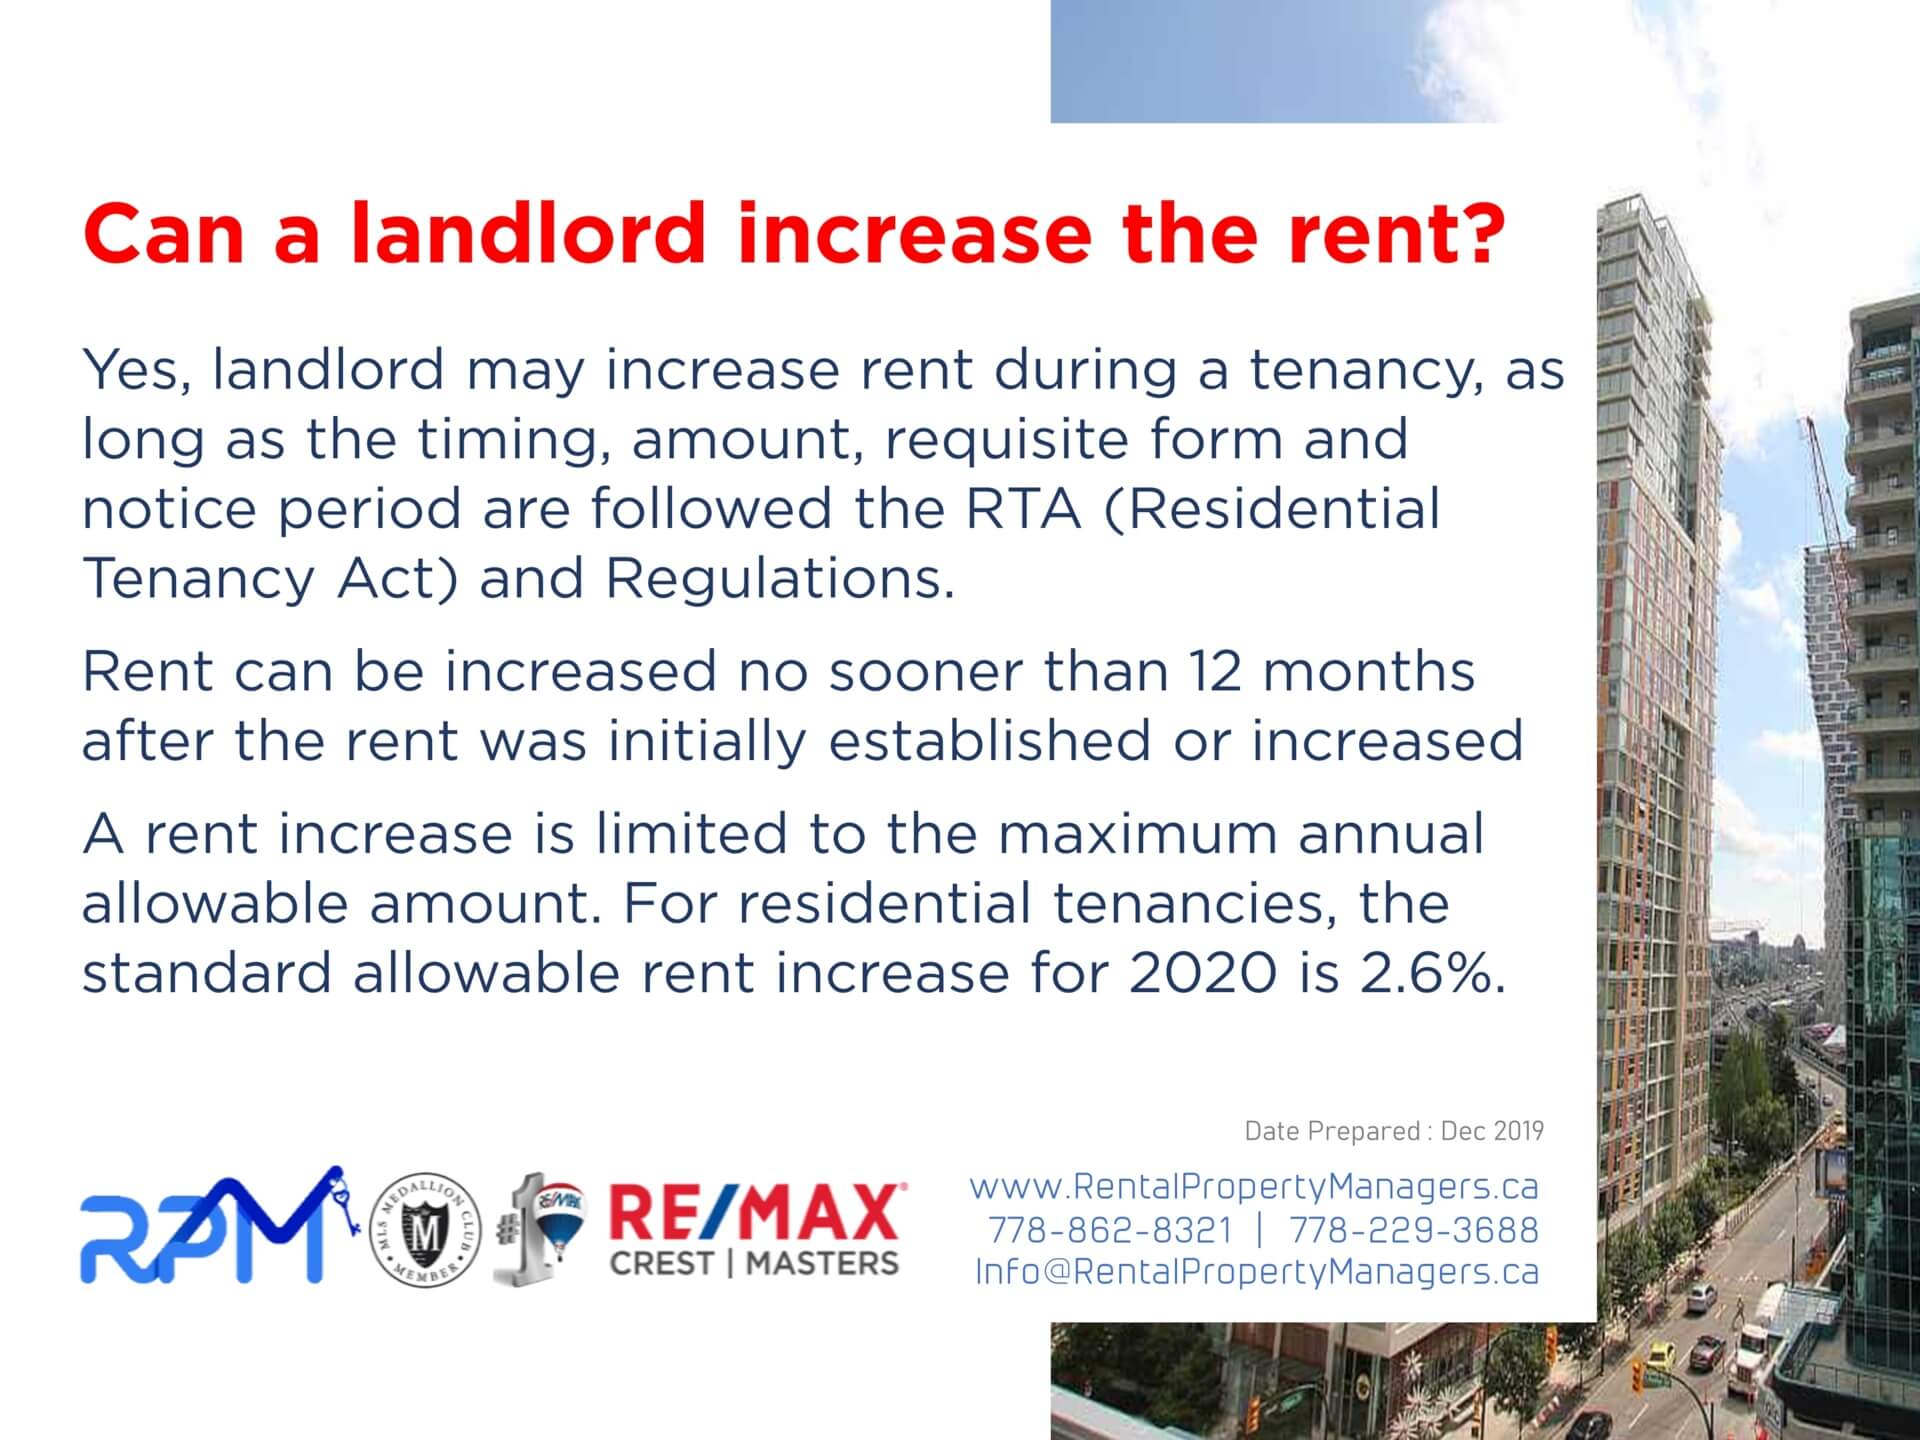 How much can an apartment complex legally raise rent while renegotiating a lease?